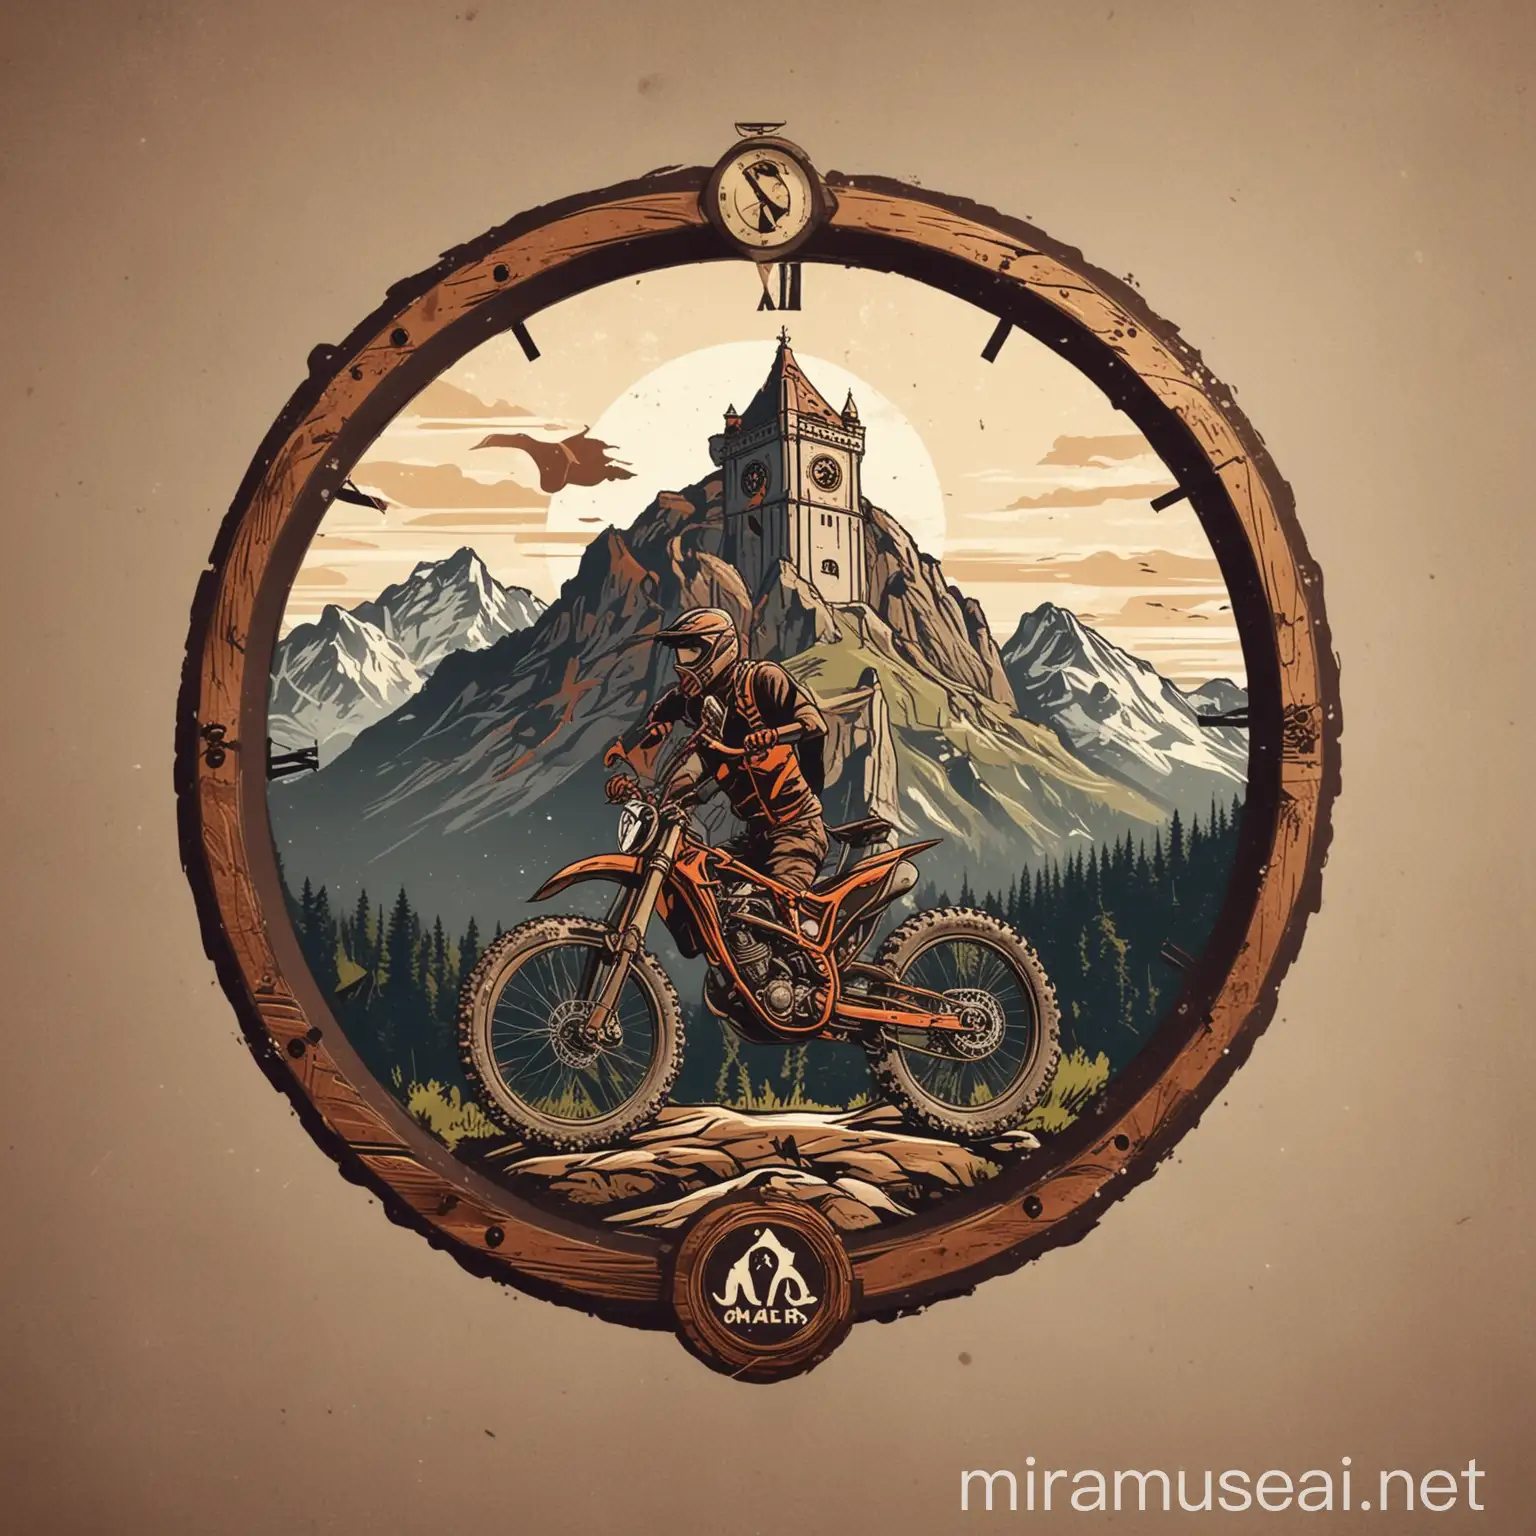 Enduro Bike Logo with Clock Tower and Mountain Backdrop